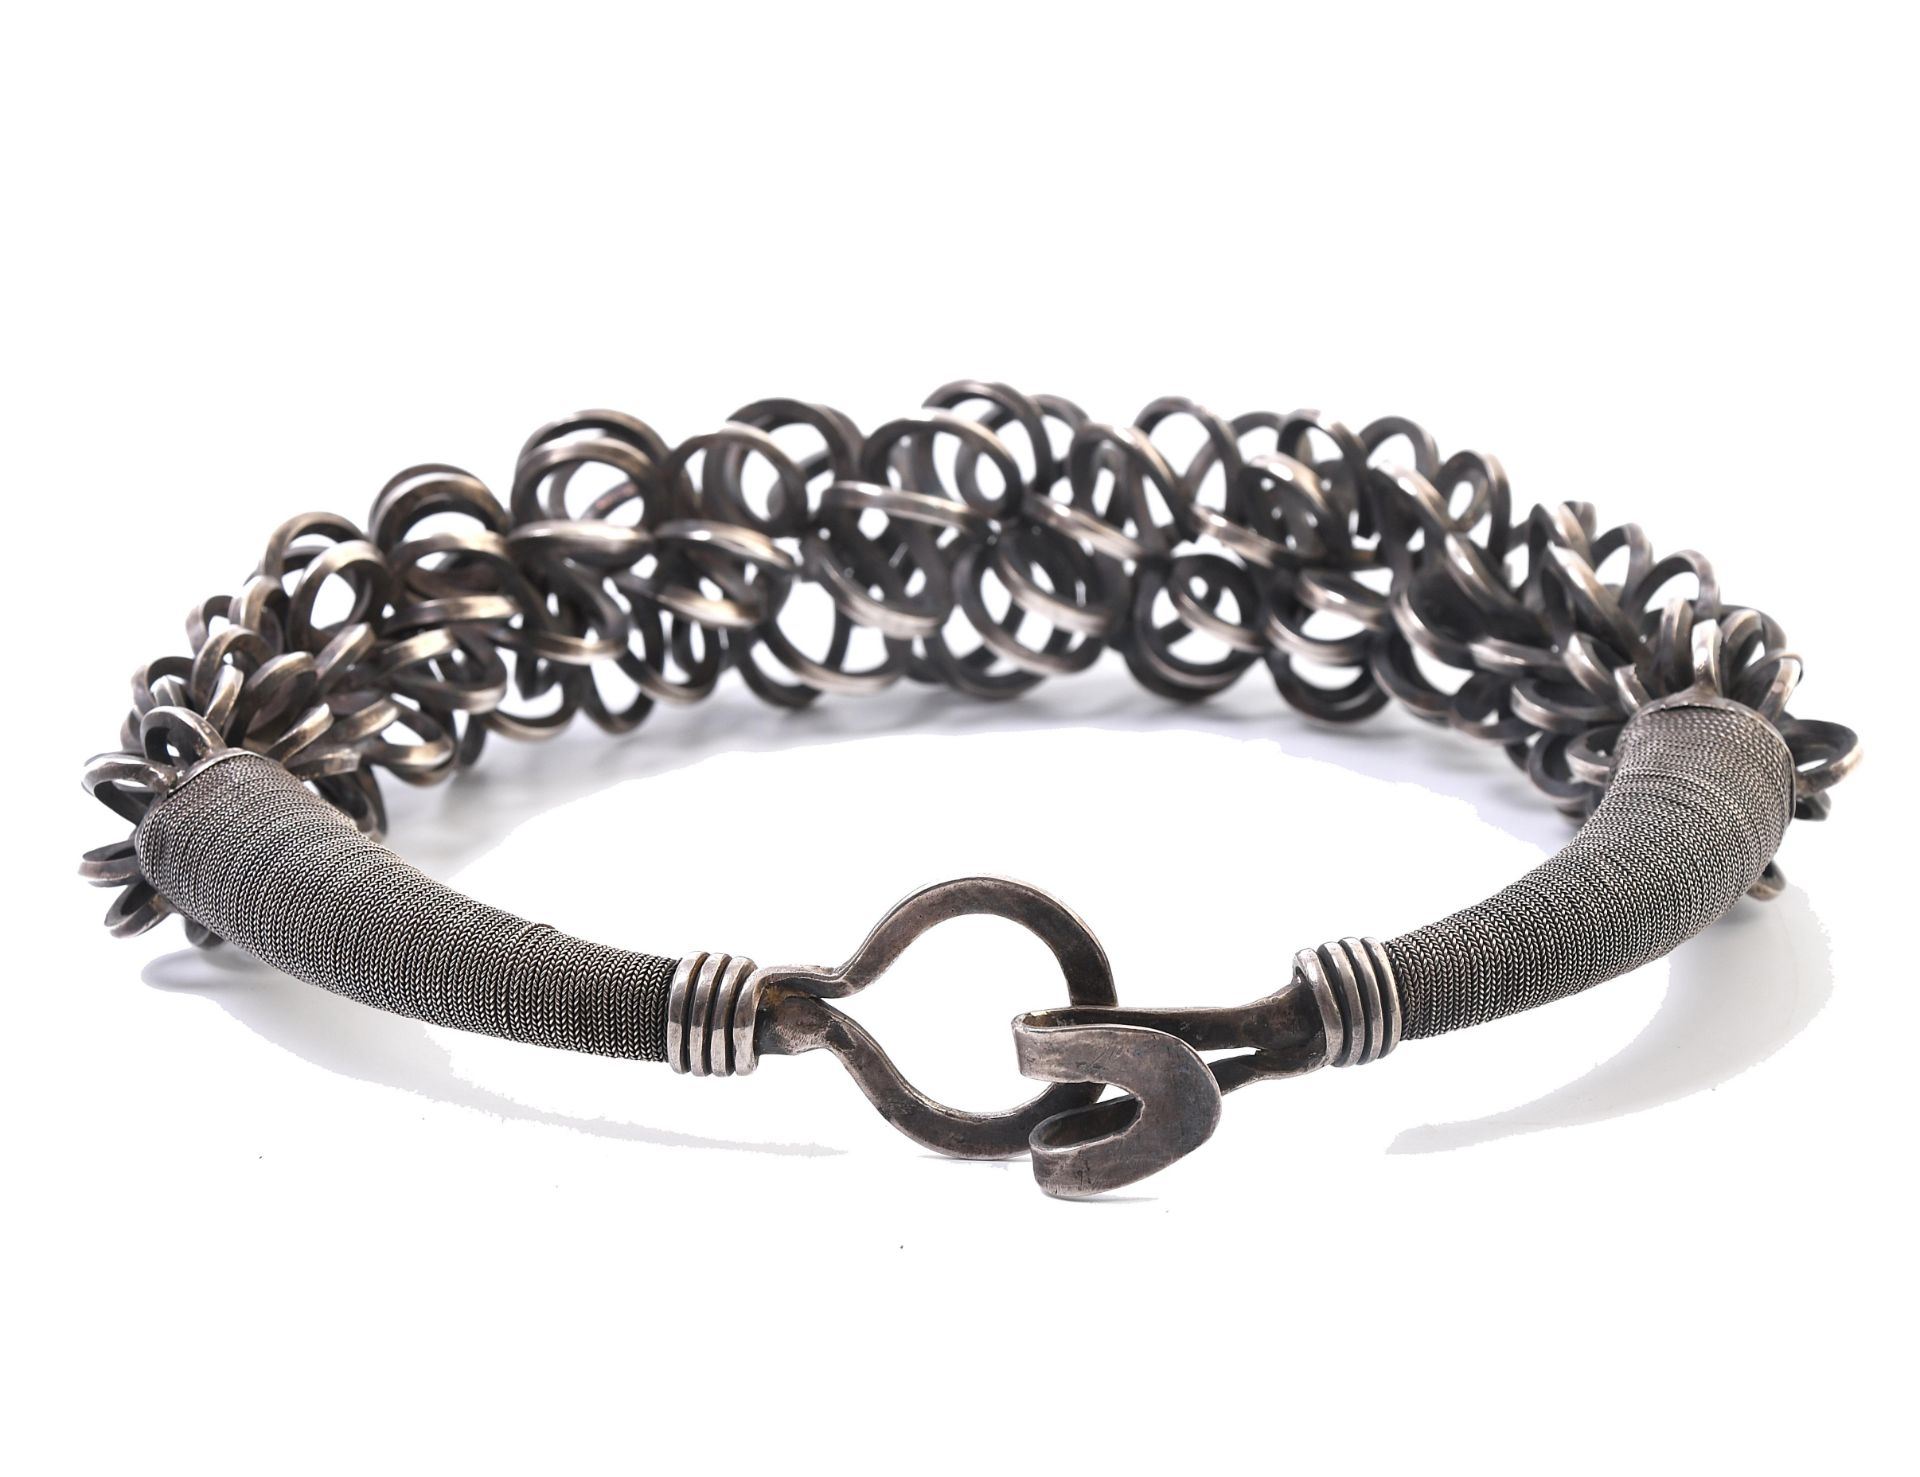 China, Guizhou, Miao a silver alloy neckring; - Image 3 of 3